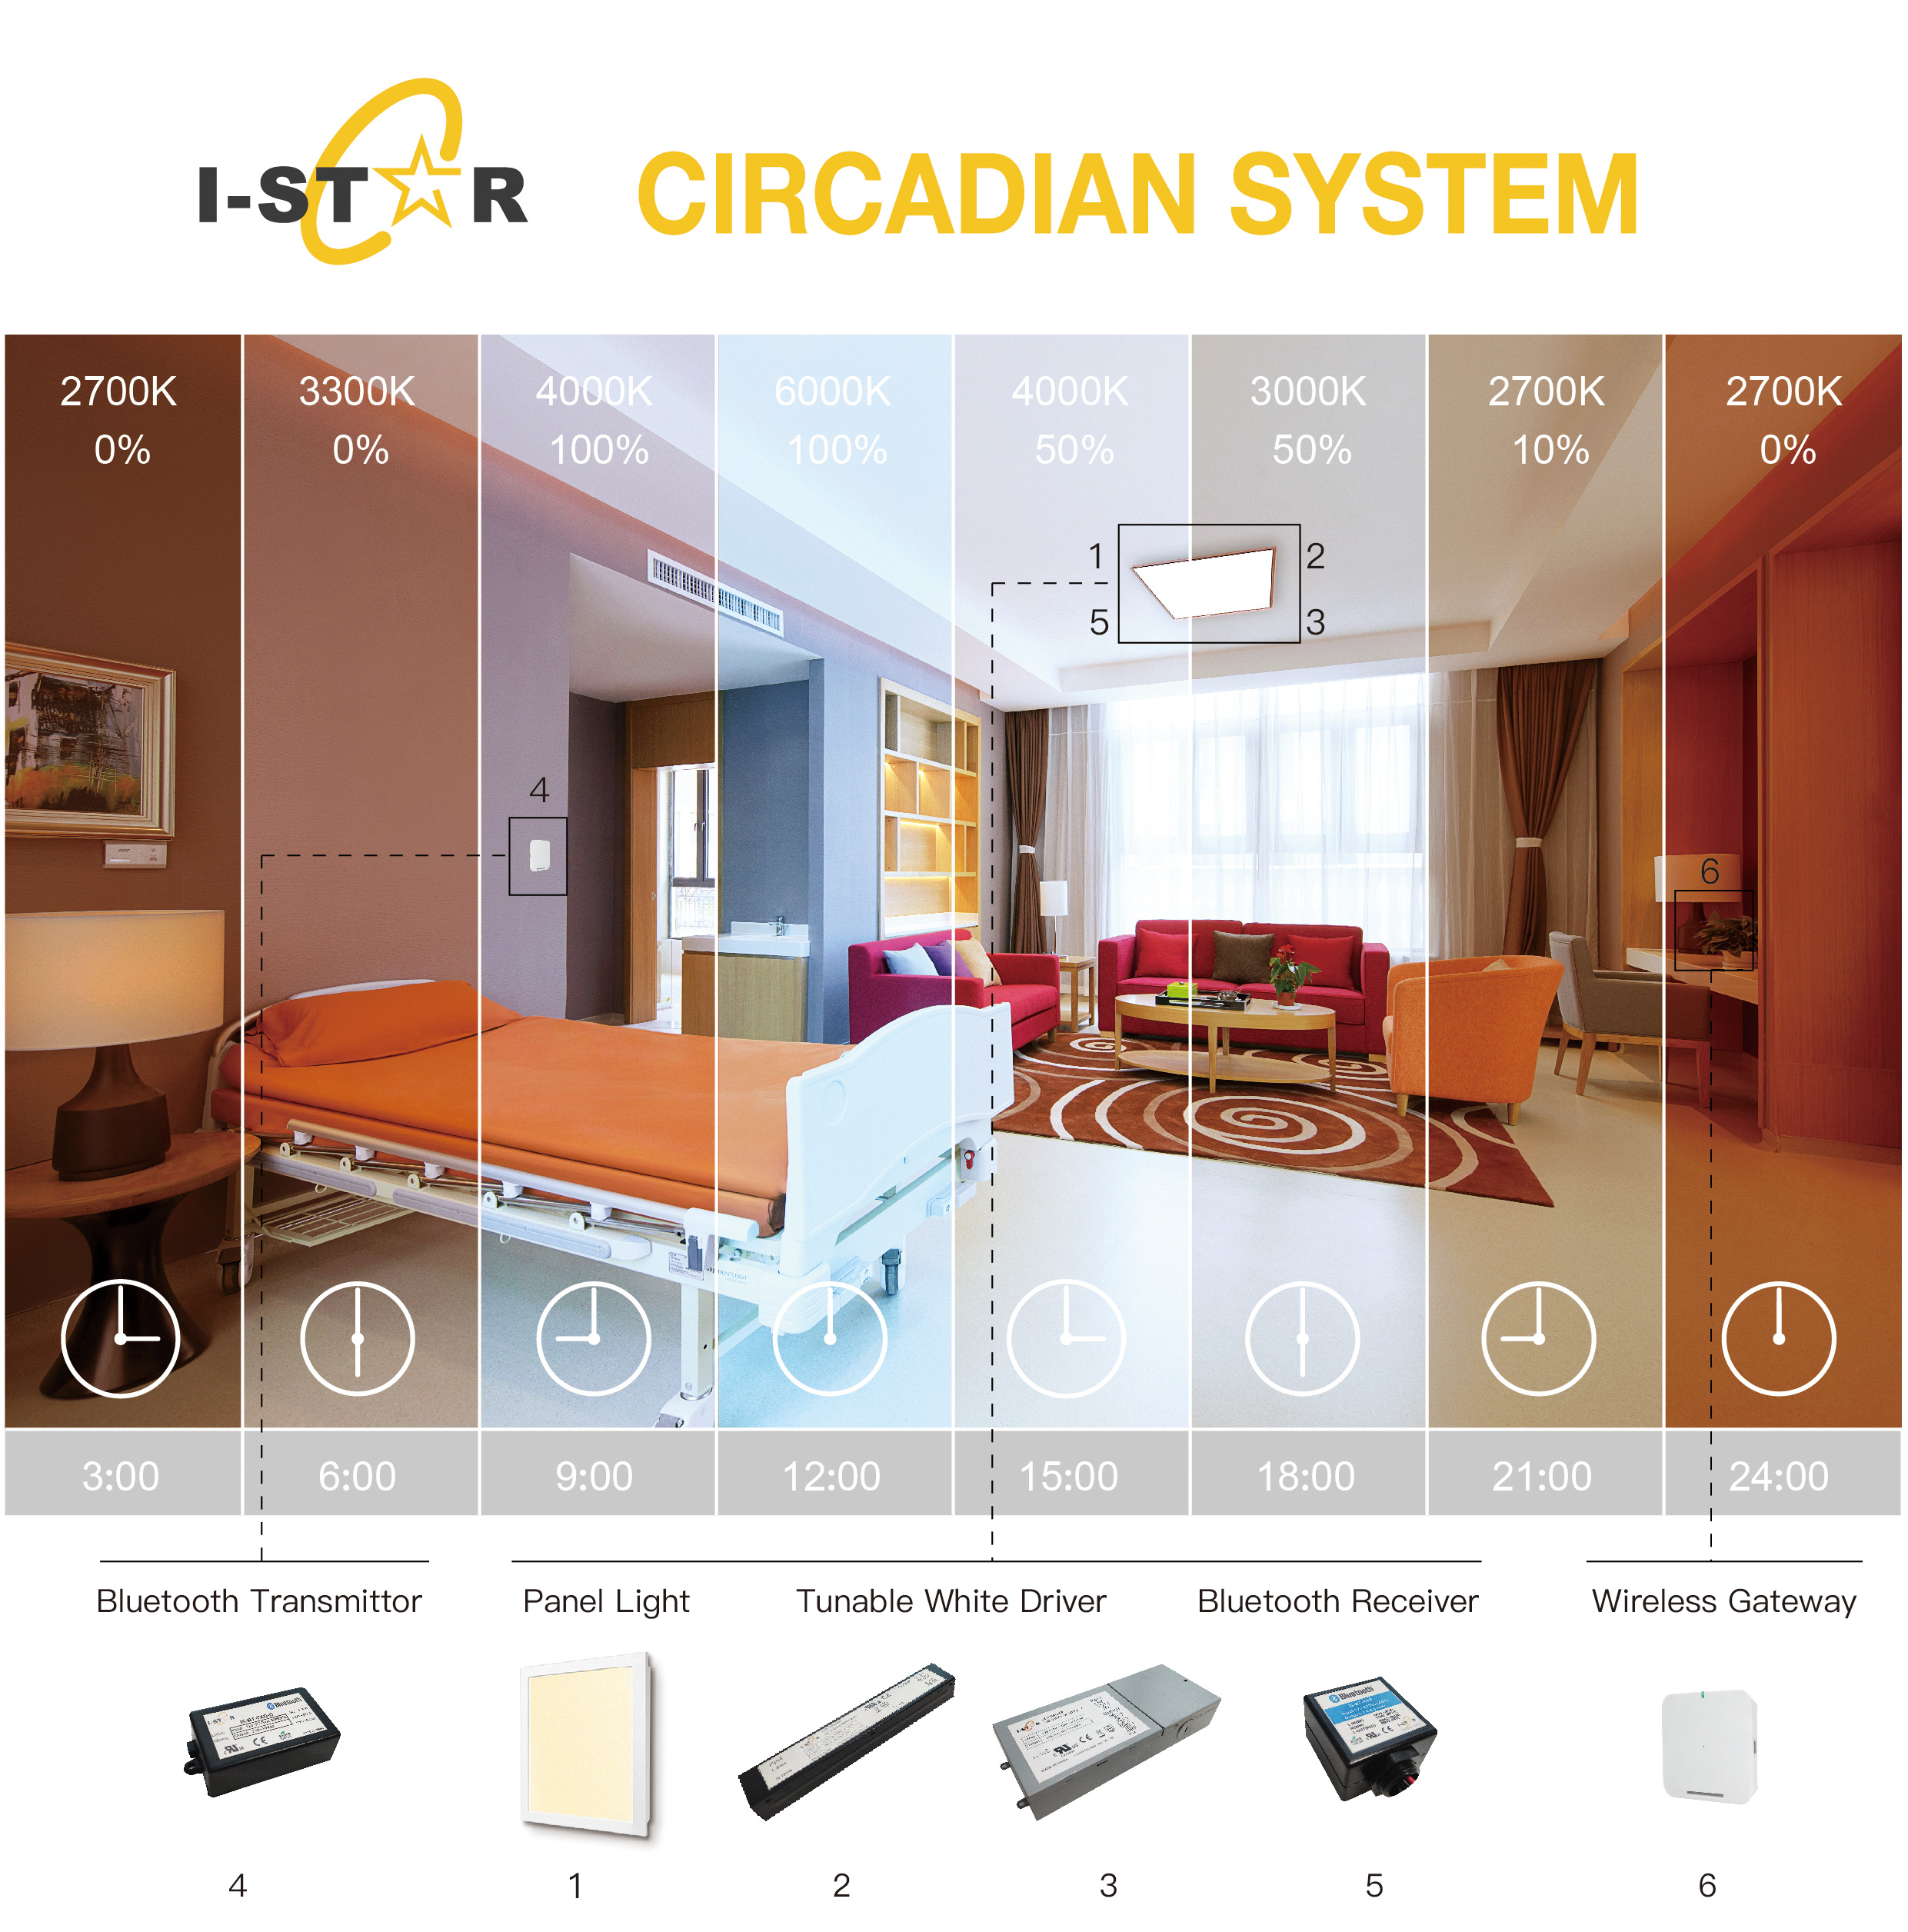 Circadian System for Color, Temperature & Dimming Controls